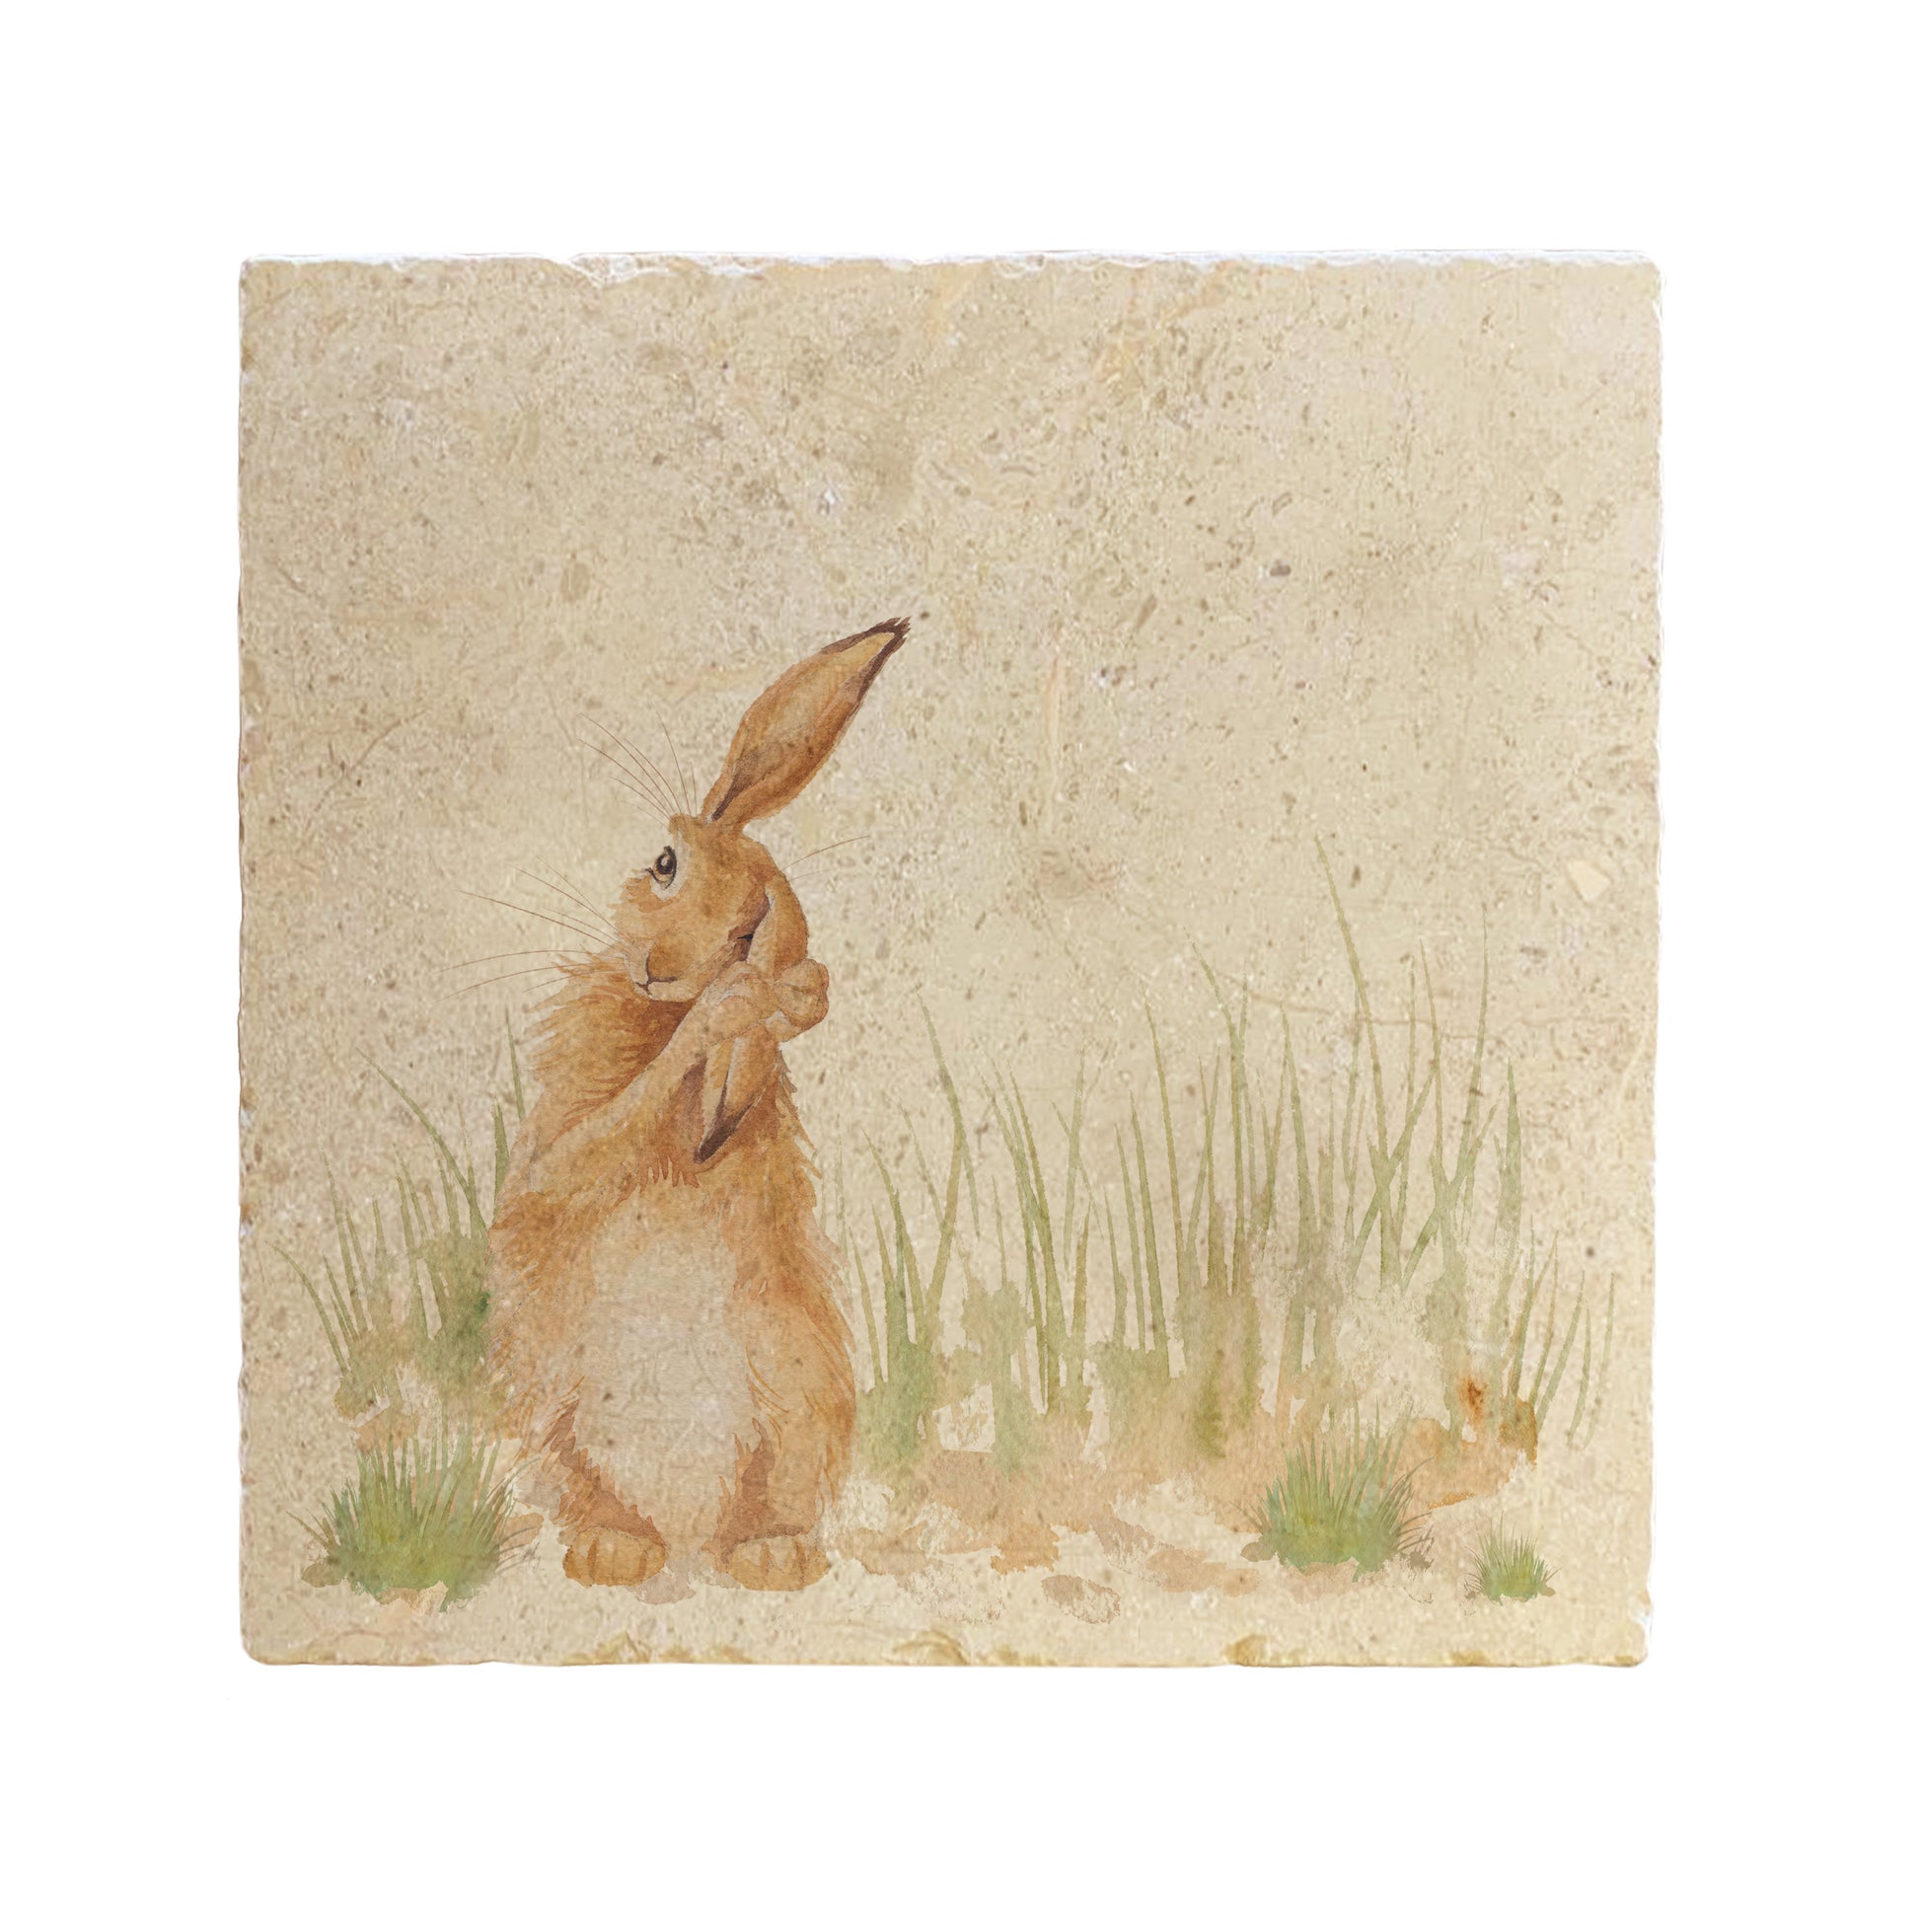 A handmade square cream marble splashback tile featuring a watercolour countryside animal design of a hare in grass cleaning his ear.